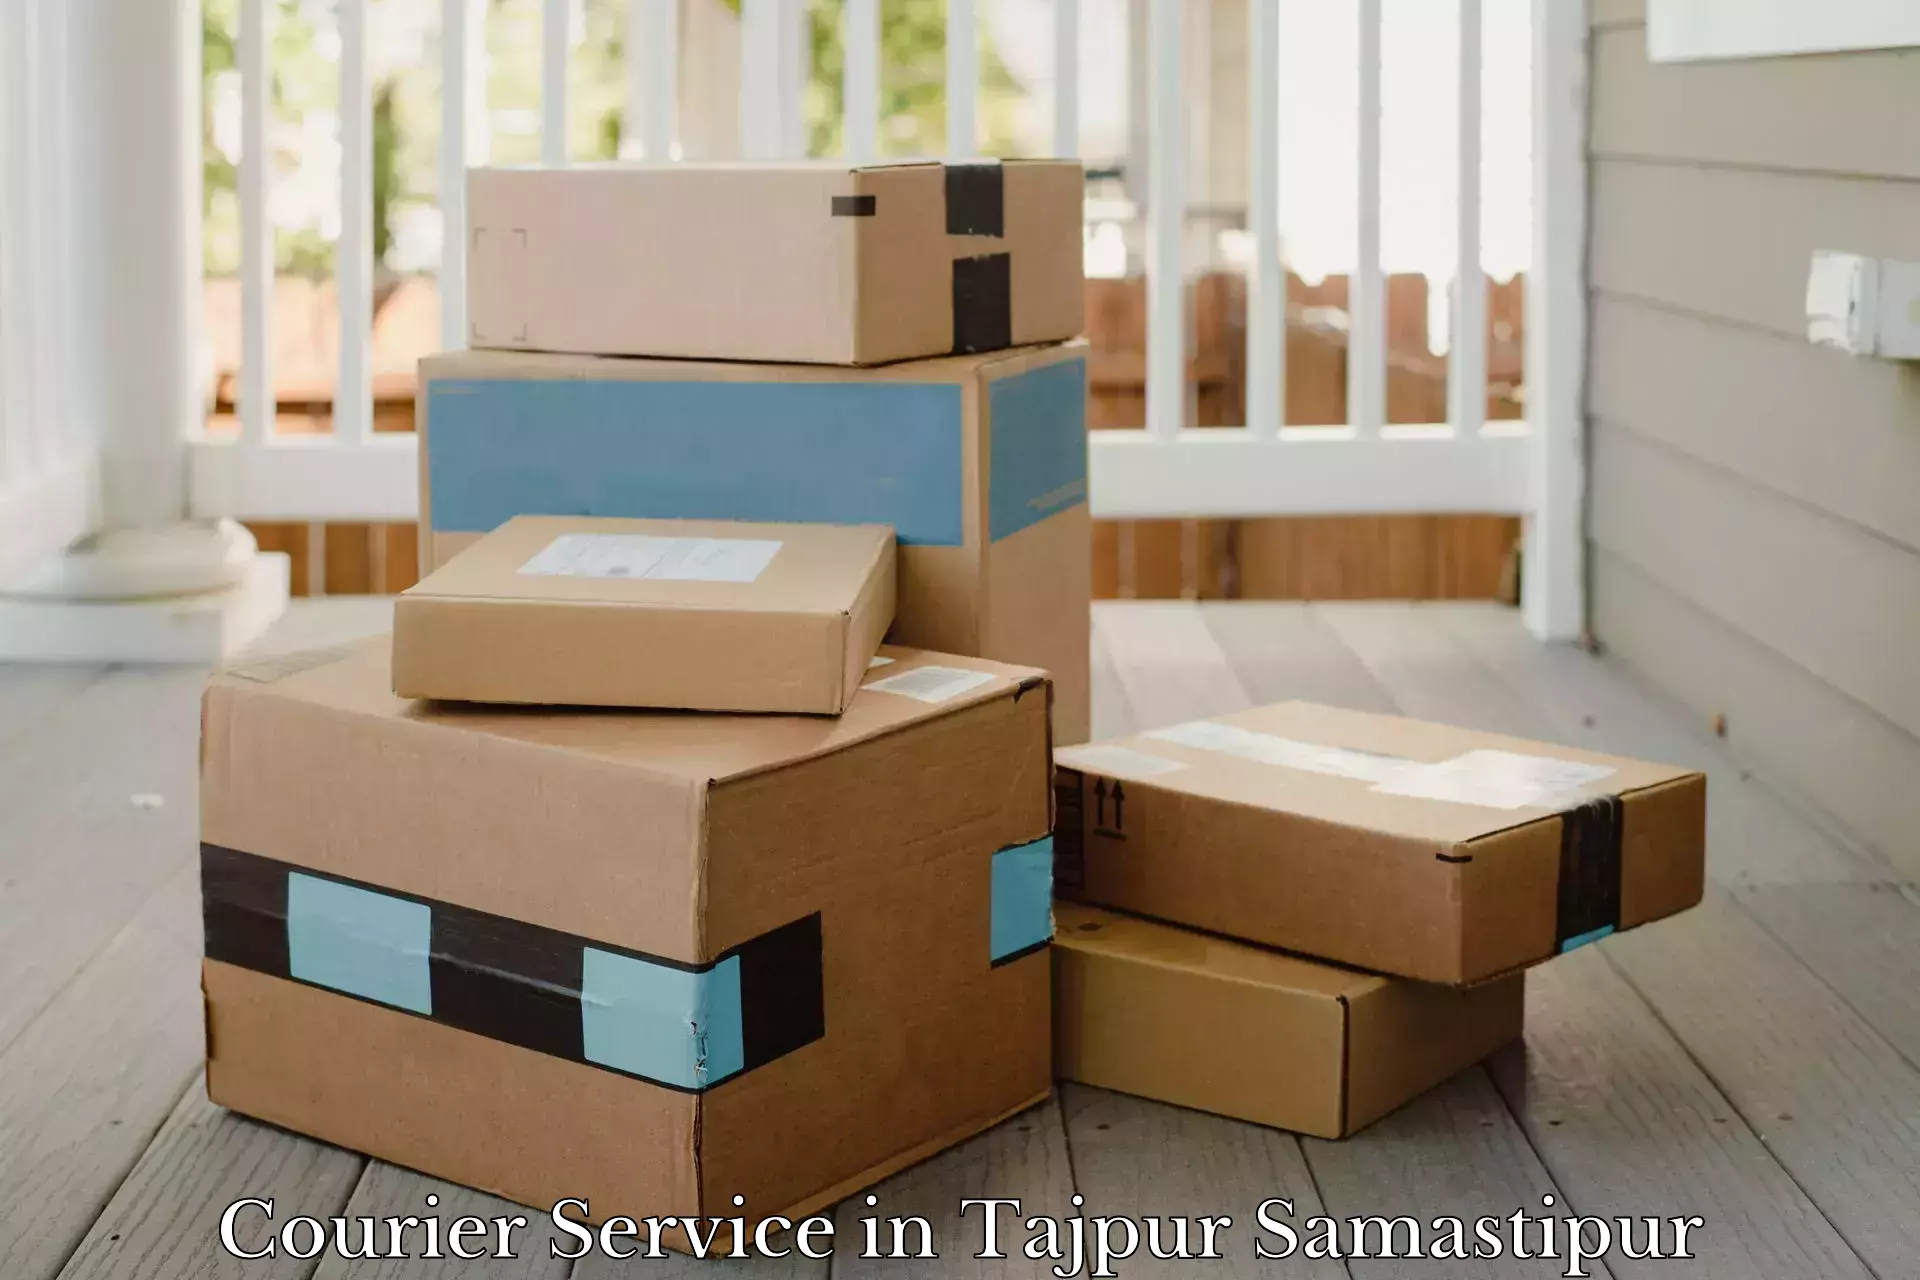 High value parcel delivery in Tajpur Samastipur